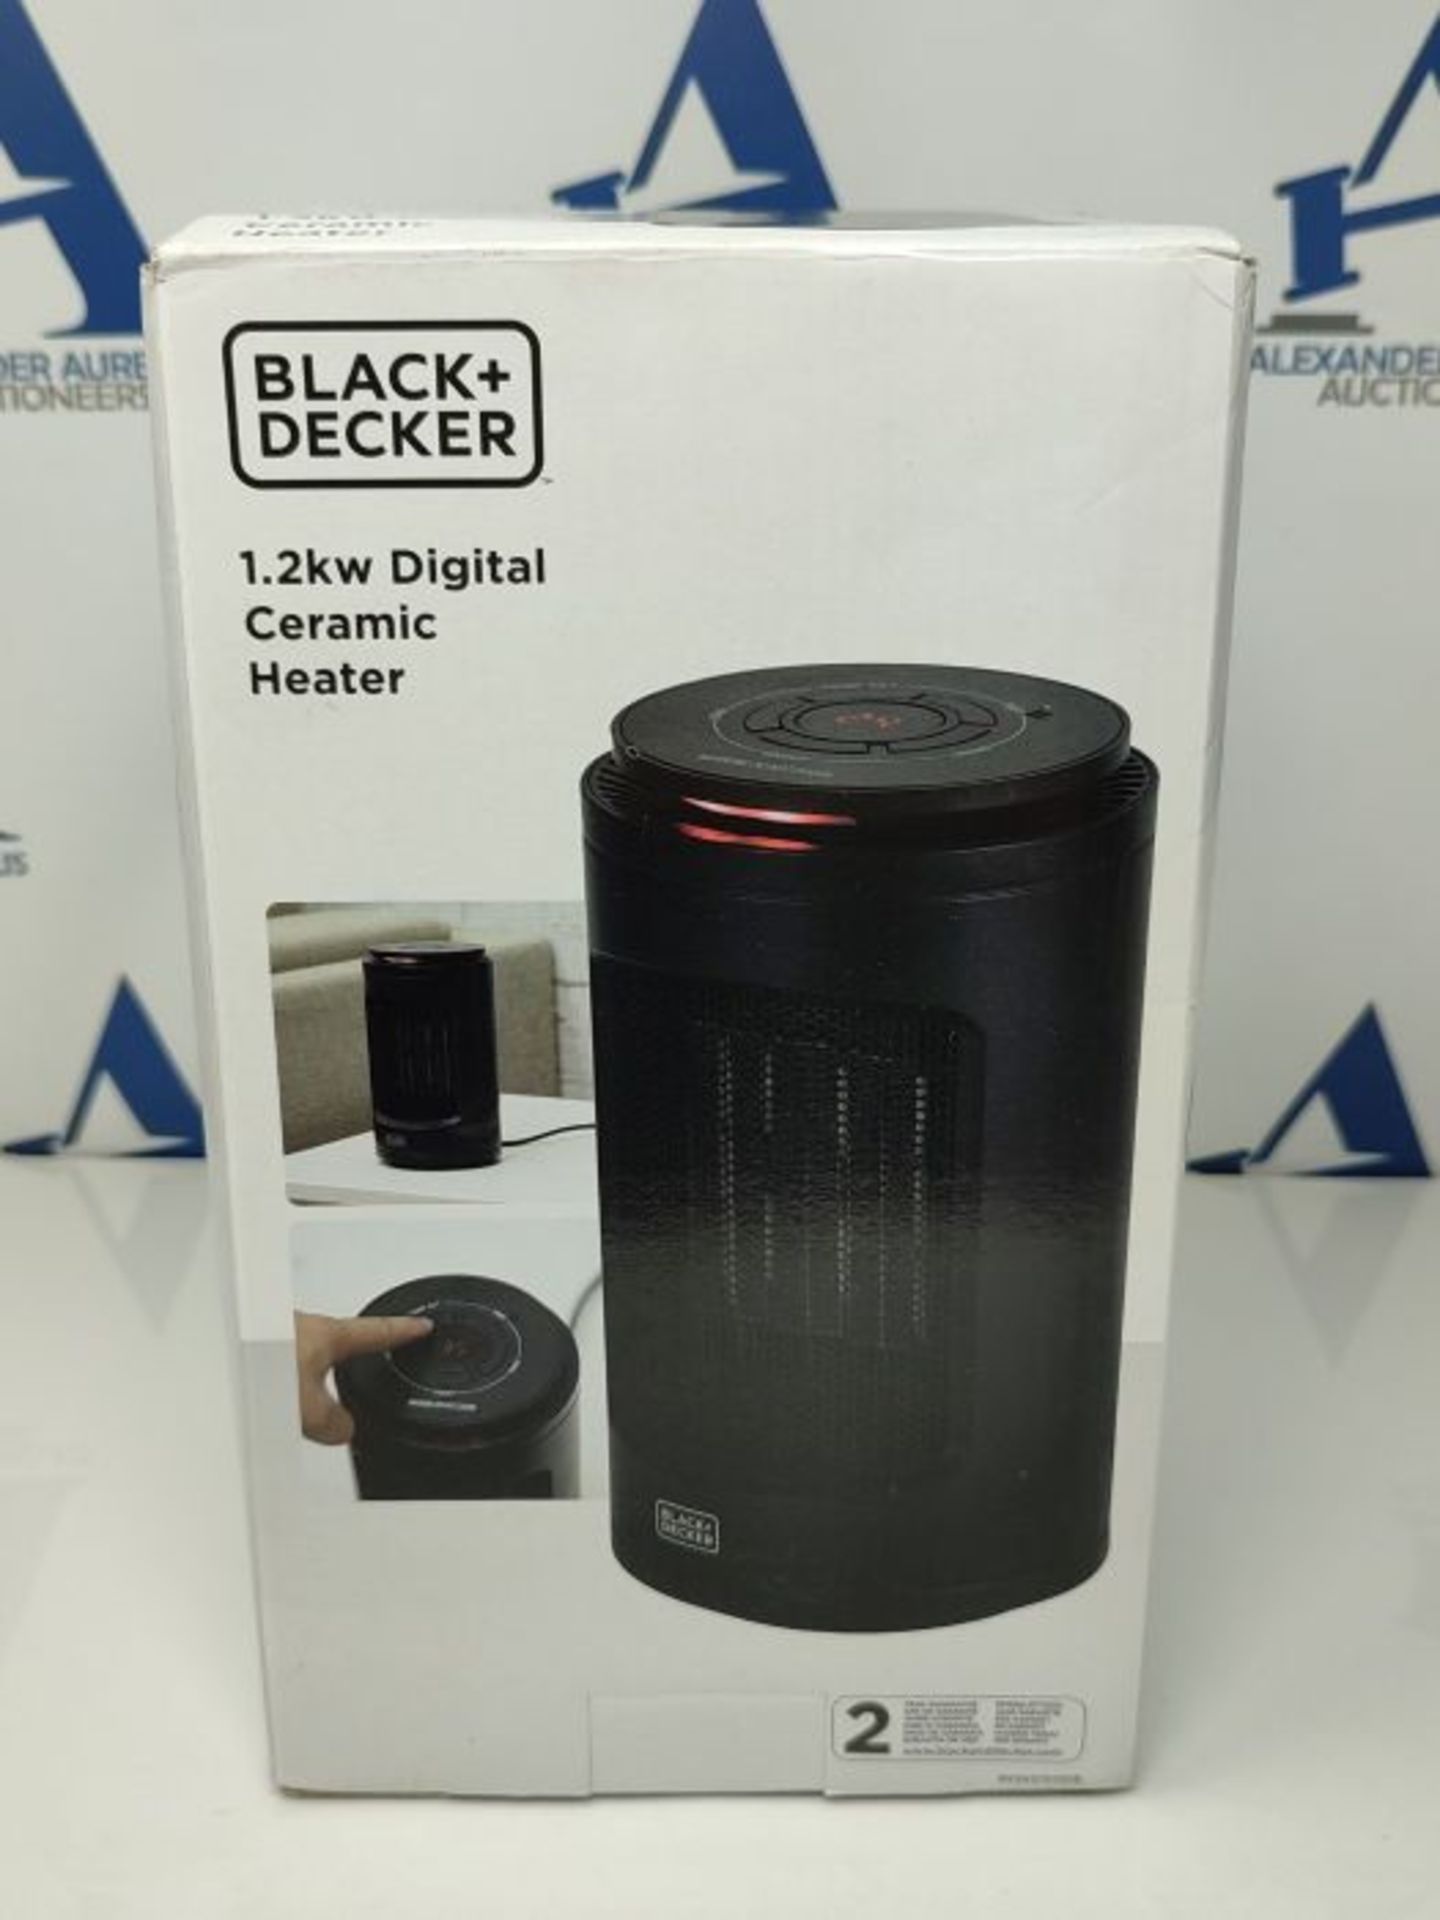 BLACK+DECKER BXSH37013GB Digital Ceramic Tower Heater with Climate Control, 9 Hour Tim - Image 2 of 3